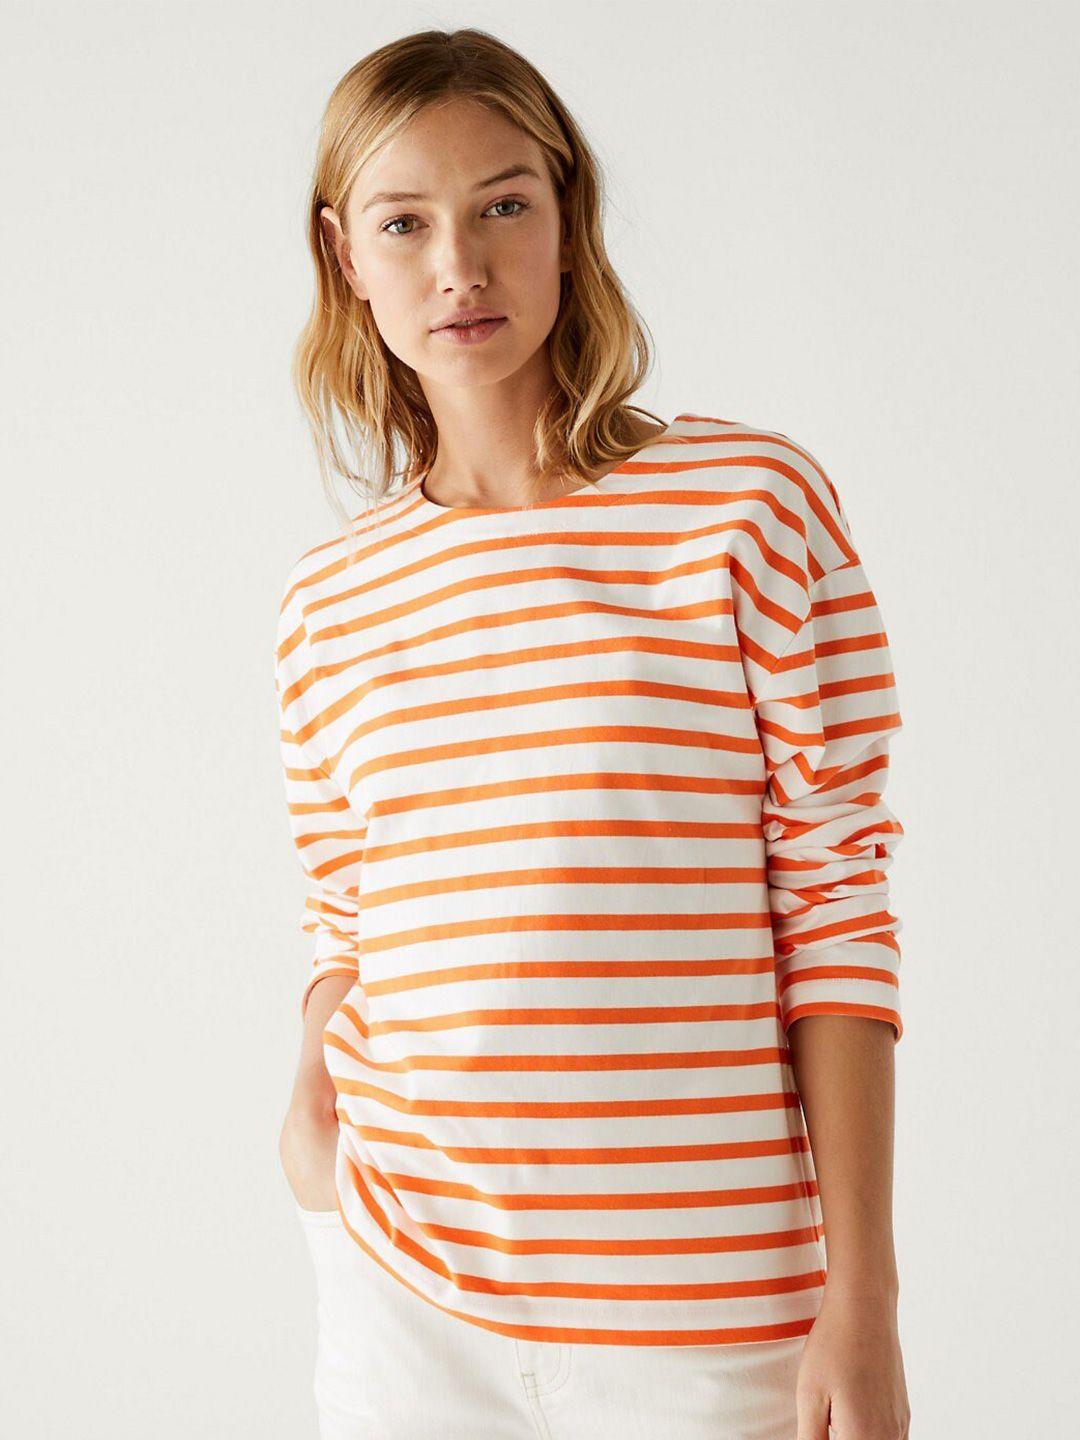 marks & spencer striped round neck long sleeves cotton top